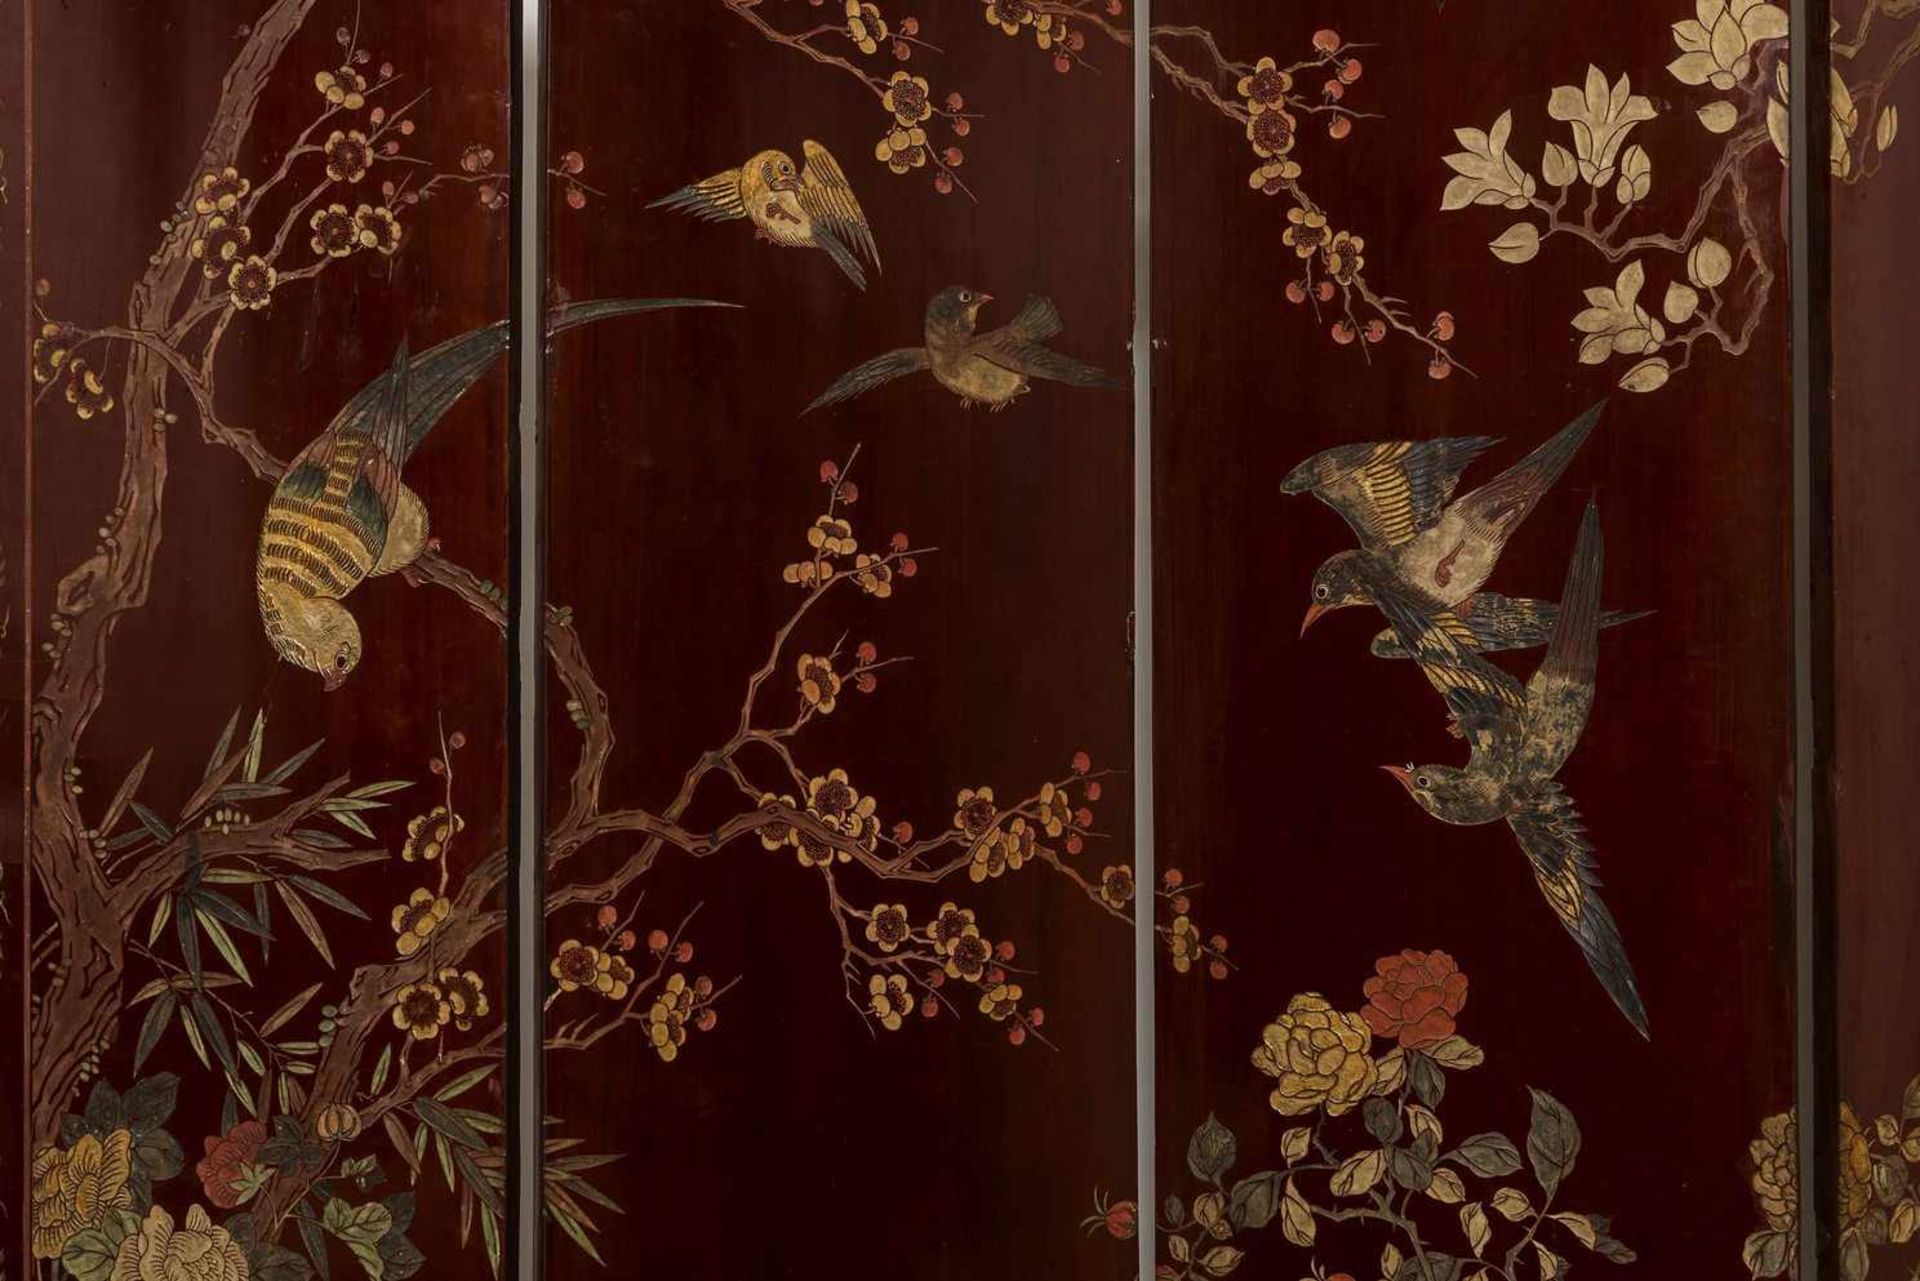 LARGE SIX-PART KOROMANDEL SCREEN DEPICTING AN IMPERIAL SCENE Wood, lacquer techniques. China, - Image 3 of 12